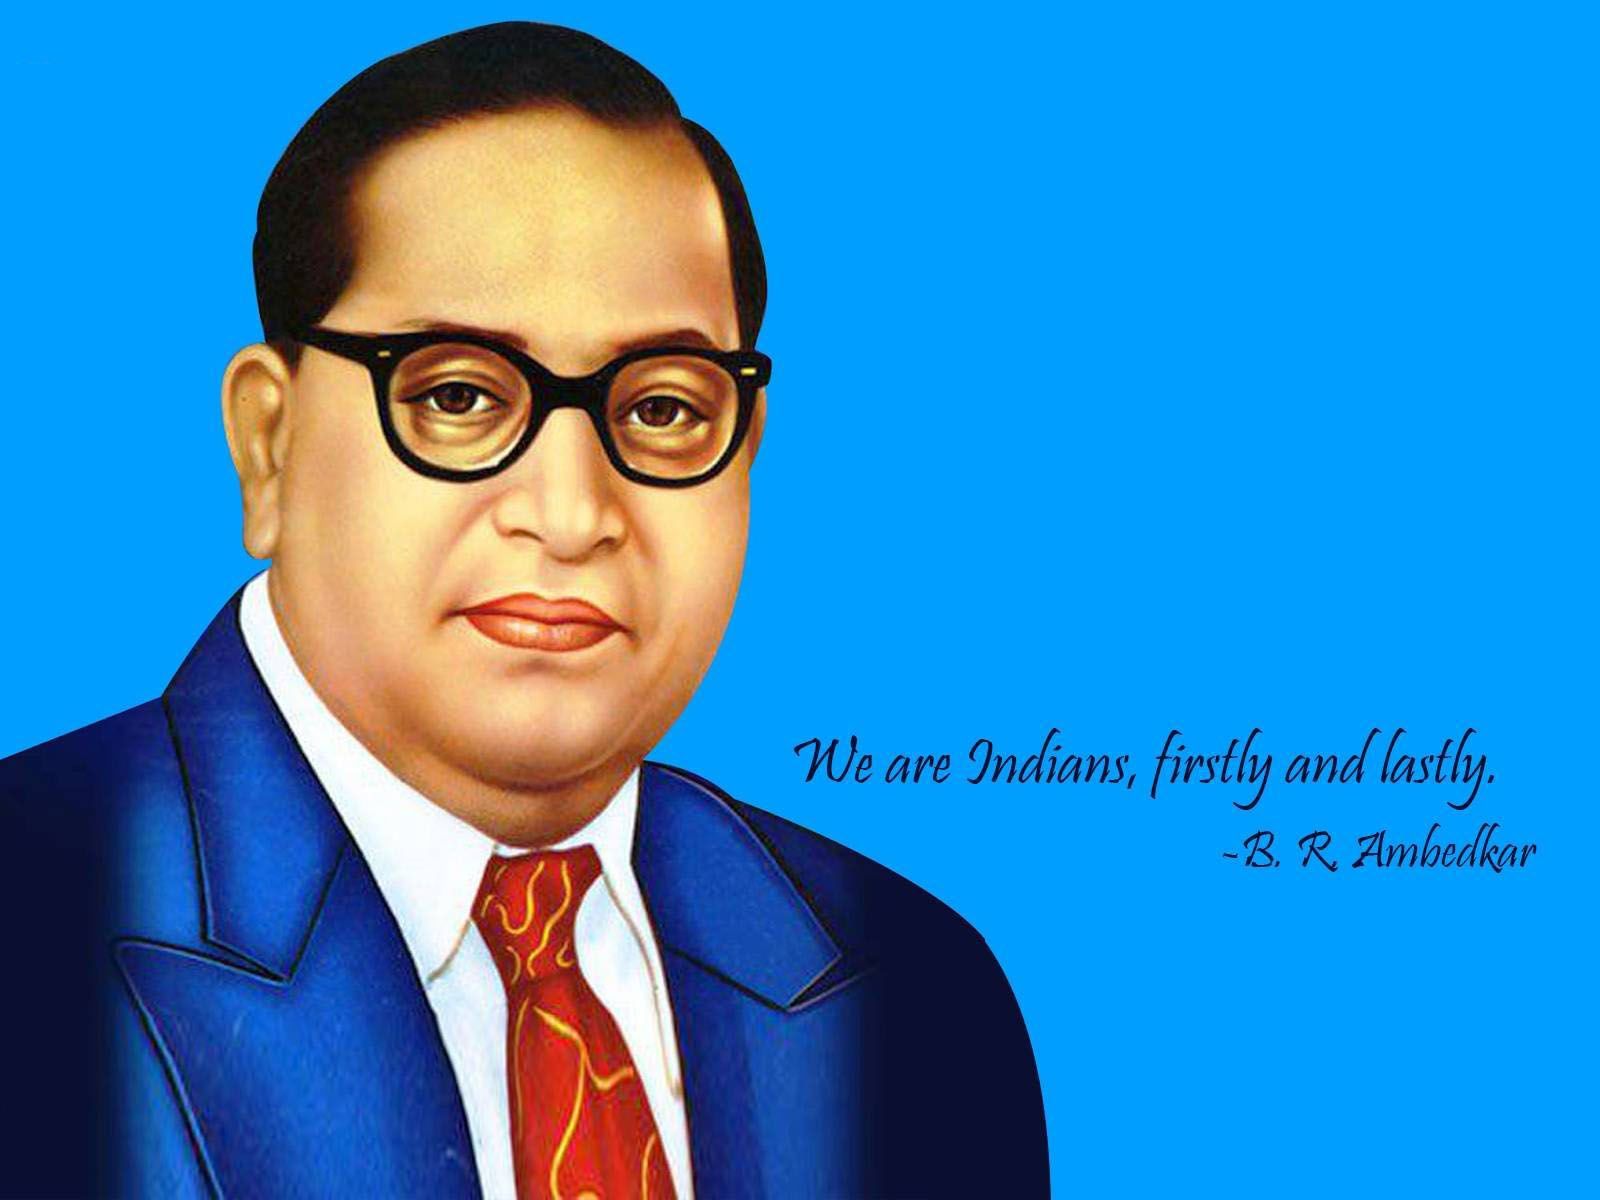 We are Indians firstly and lastly. B.R. Ambedkar‬